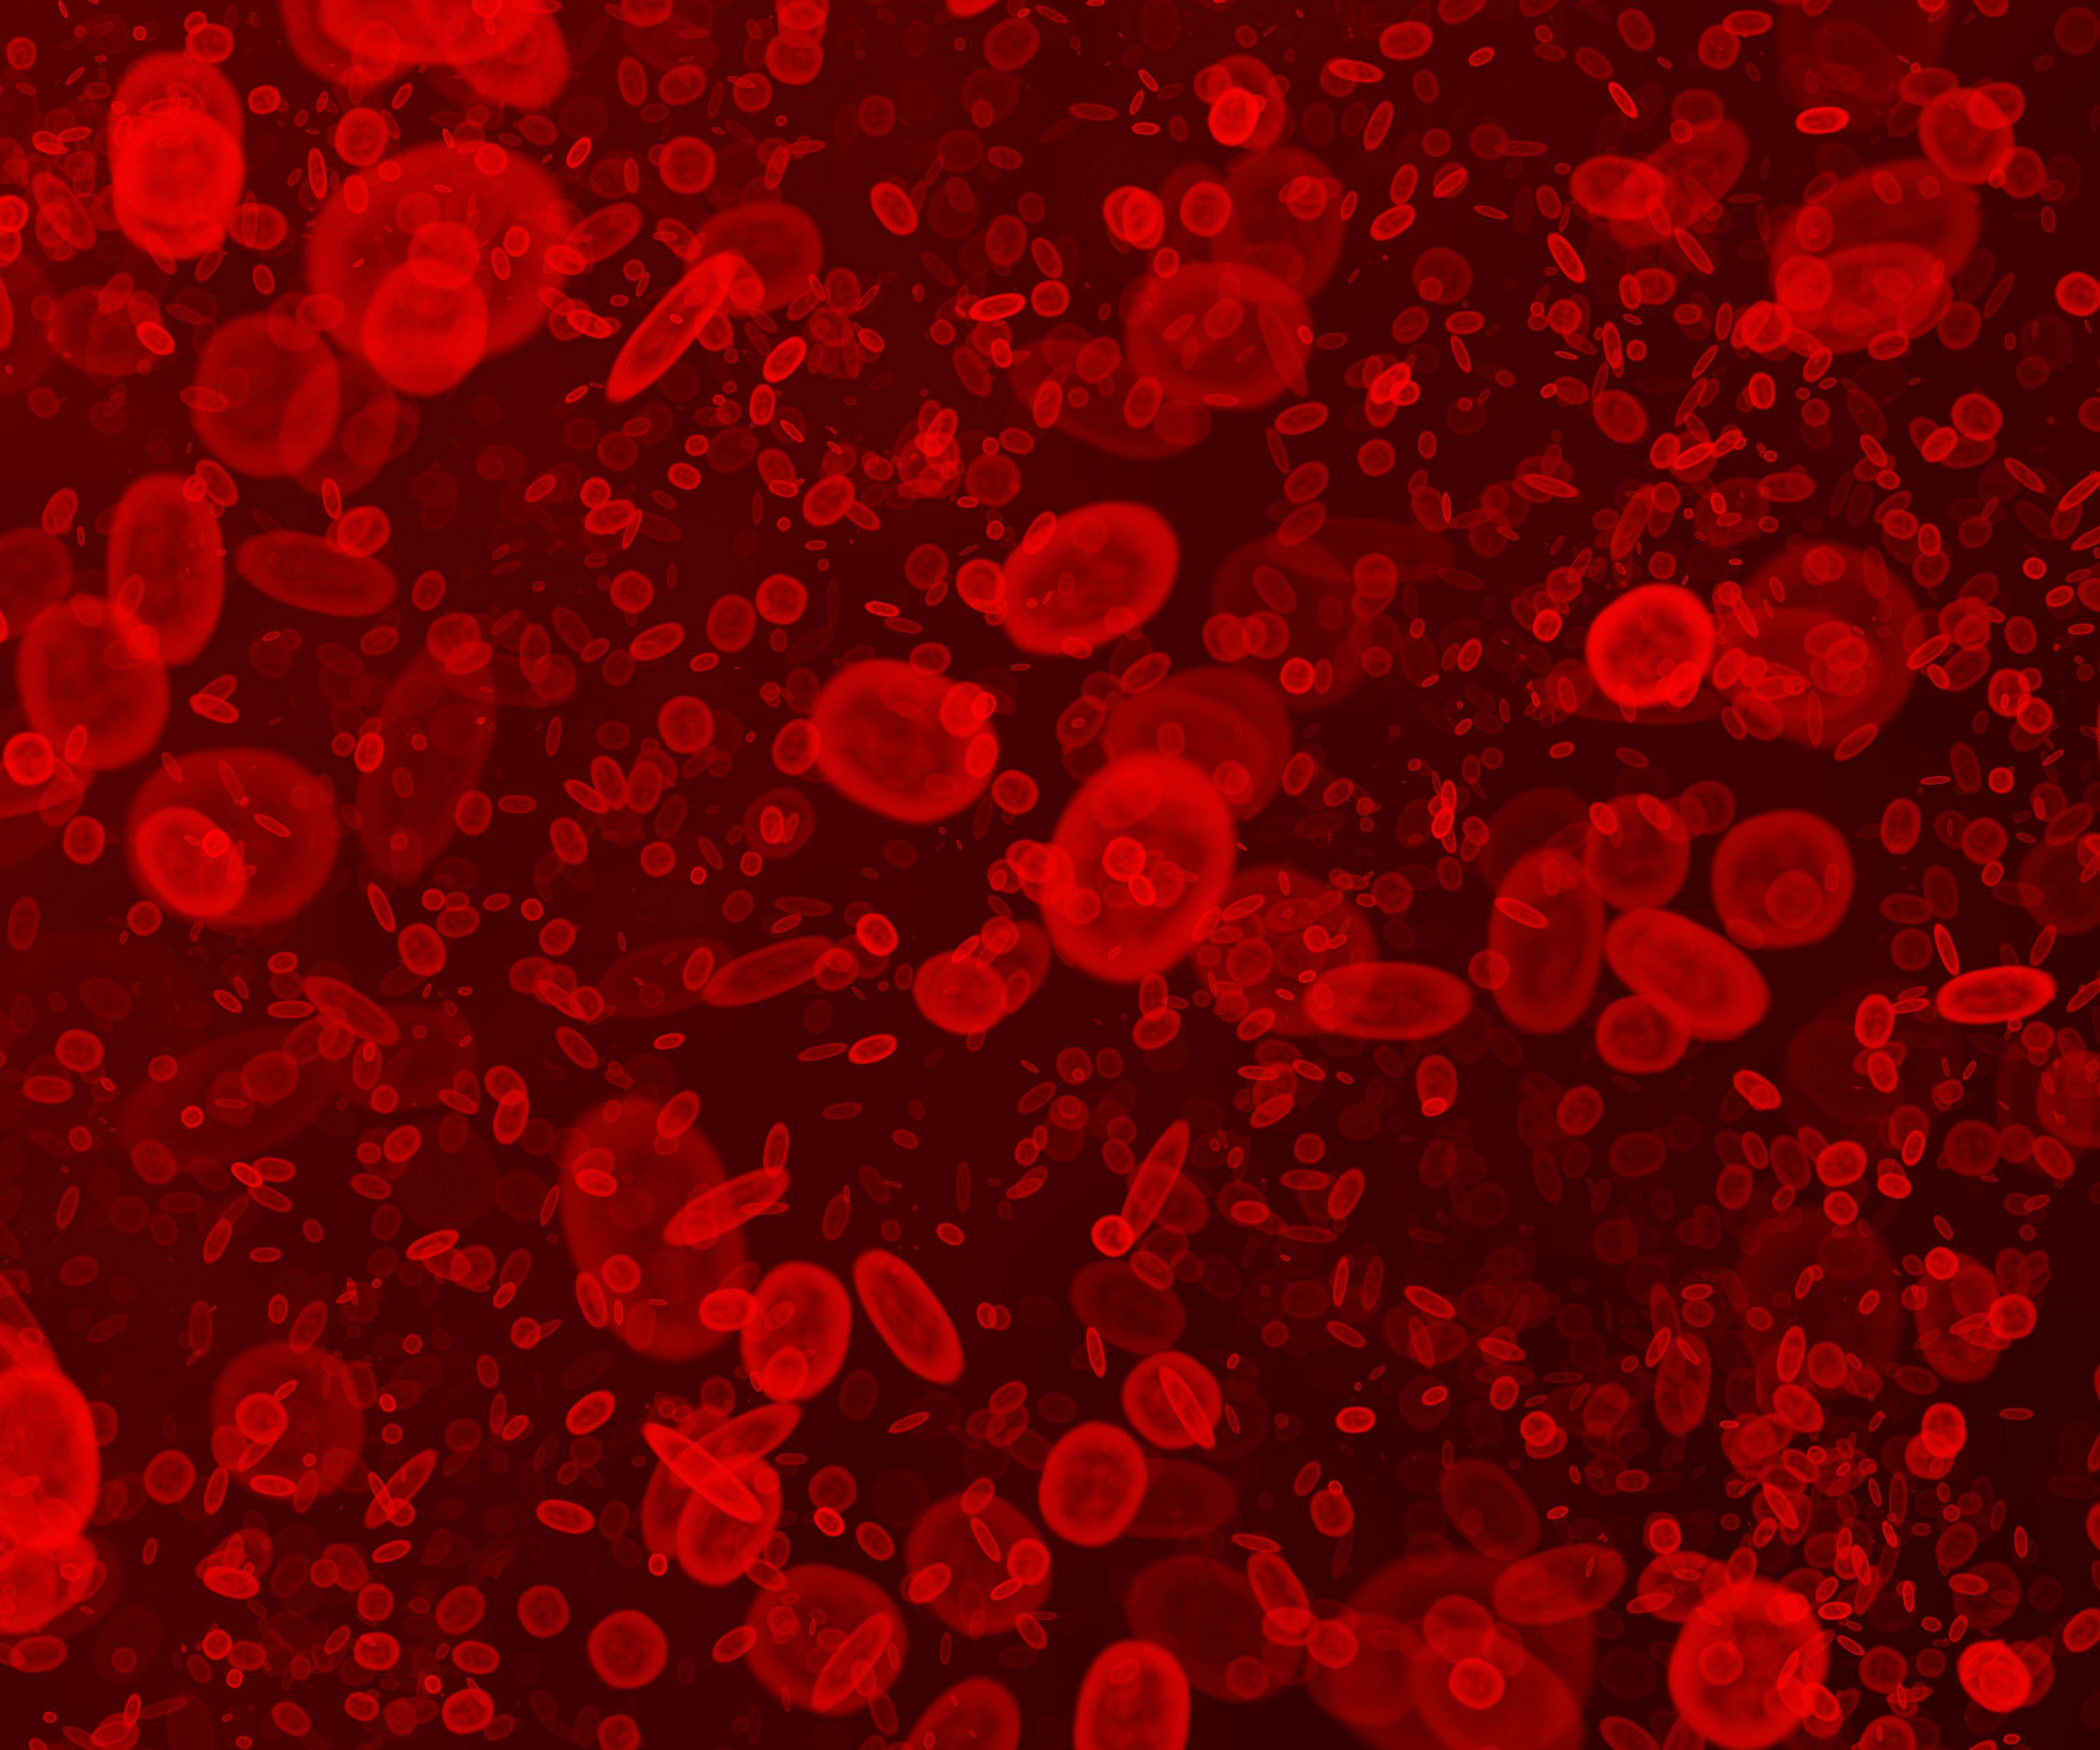 Intense cluttering of blood cells | Image Credit: © Argus - stock.adobe.com